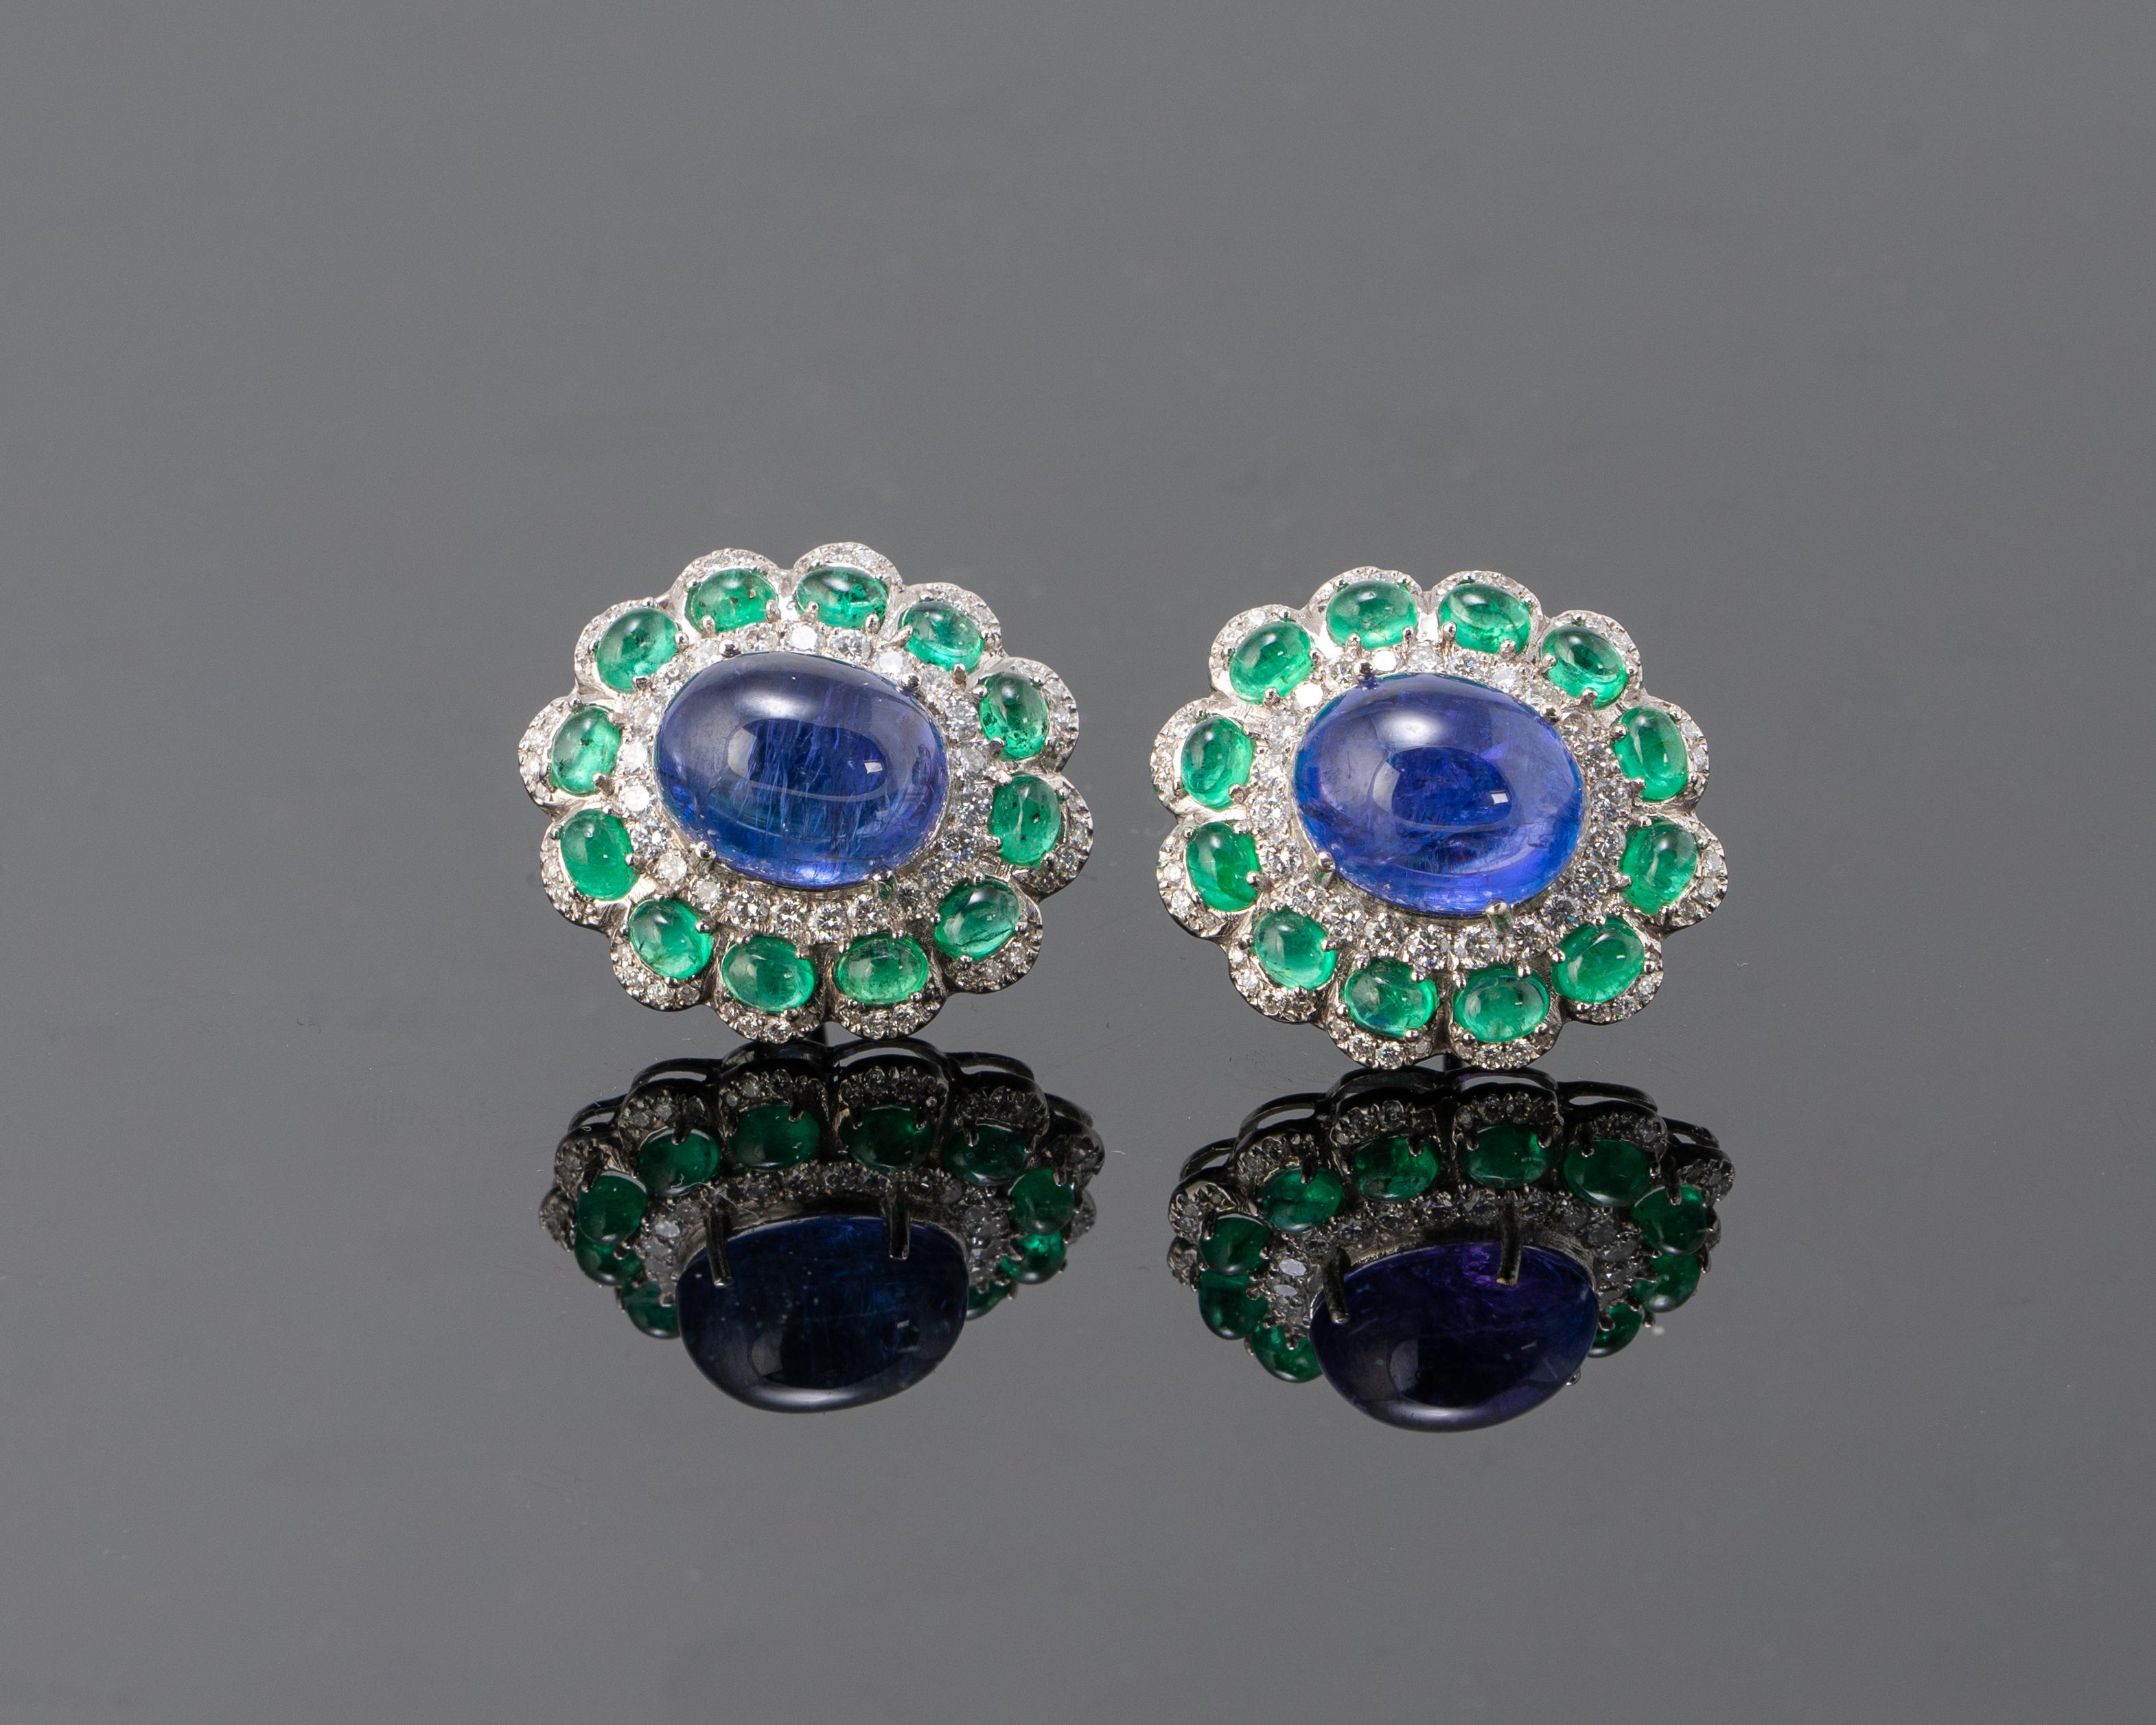 A beautiful pair of natural Tanzanite cabochons and natural Emerald cabochon earrings, all set in solid 18K white gold. These stones are transparent, with some naturally occuring inclusions, making each stone unique. The earrings come with a push